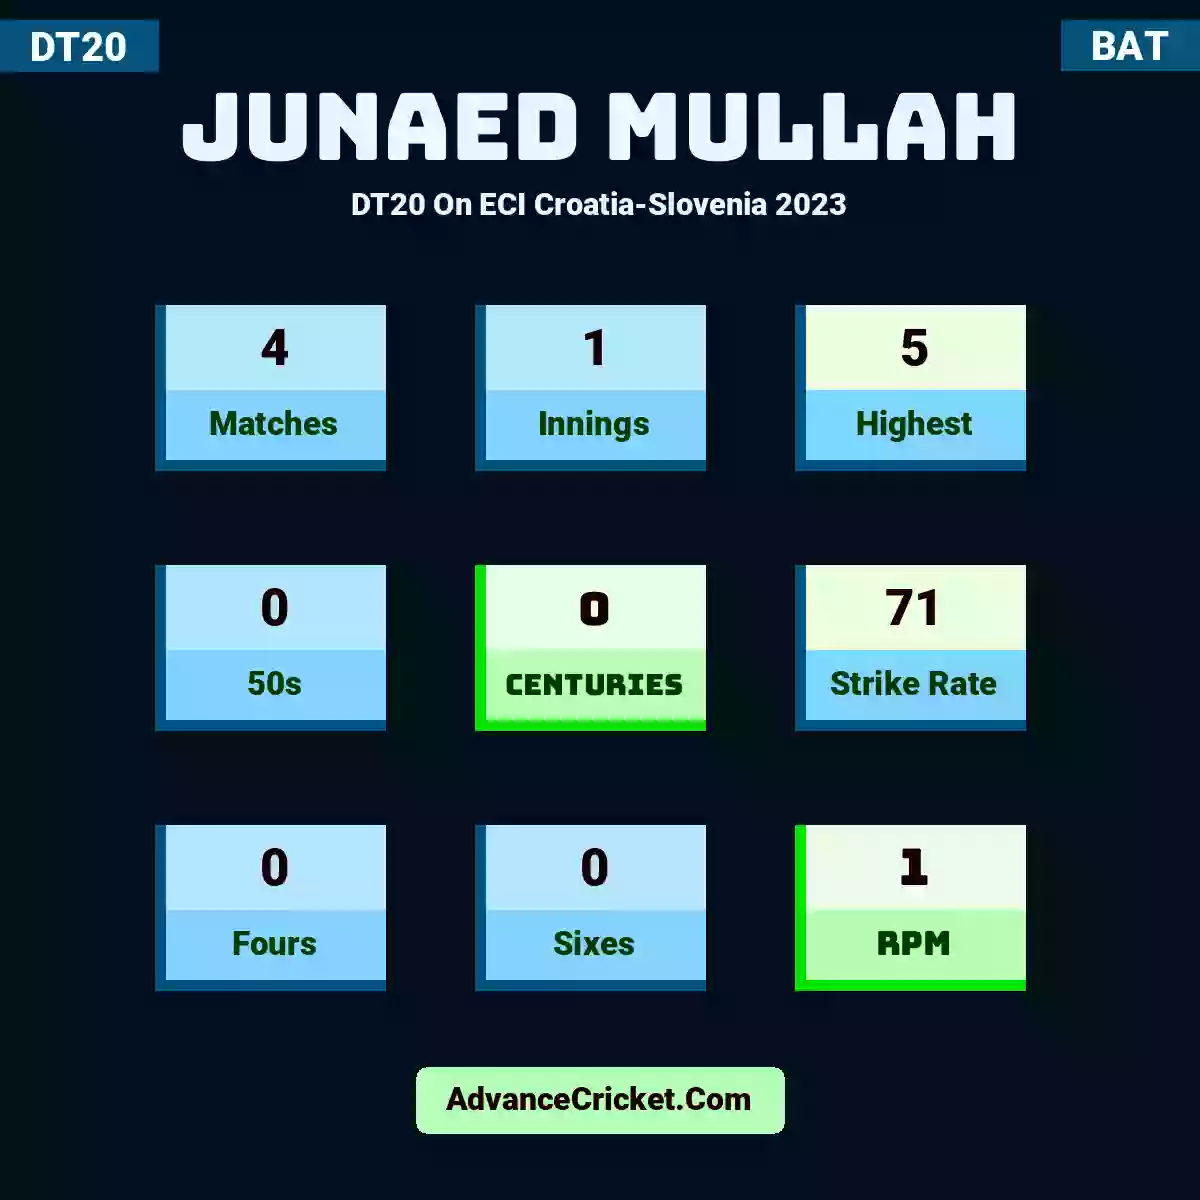 Junaed Mullah DT20  On ECI Croatia-Slovenia 2023, Junaed Mullah played 4 matches, scored 5 runs as highest, 0 half-centuries, and 0 centuries, with a strike rate of 71. J.Mullah hit 0 fours and 0 sixes, with an RPM of 1.